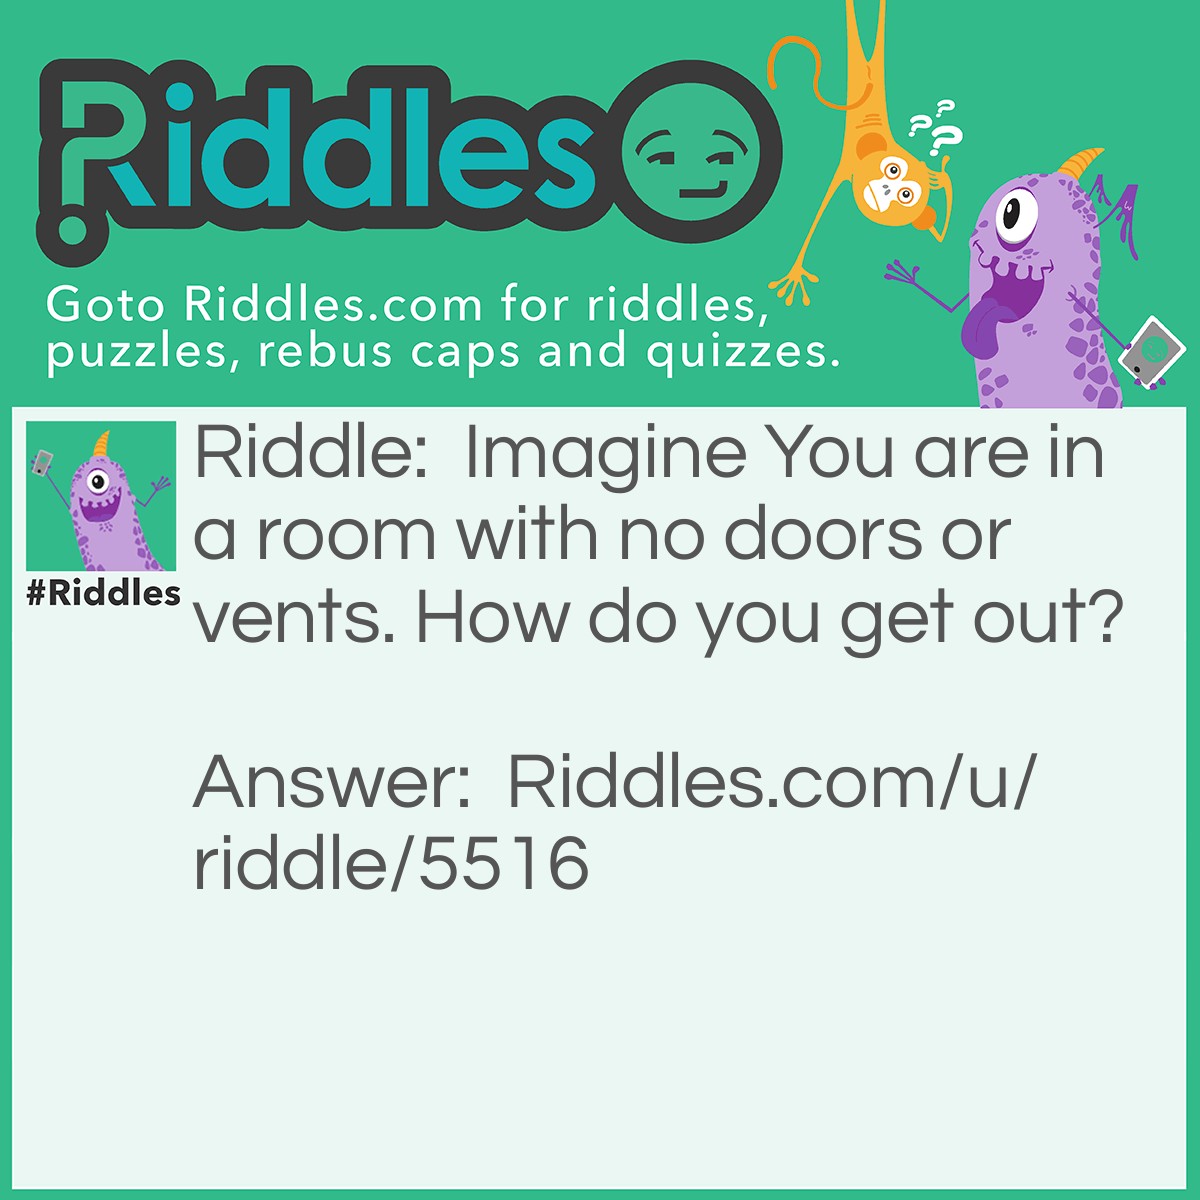 Riddle: Imagine You are in a room with no doors or vents. How do you get out? Answer: Stop imagining.